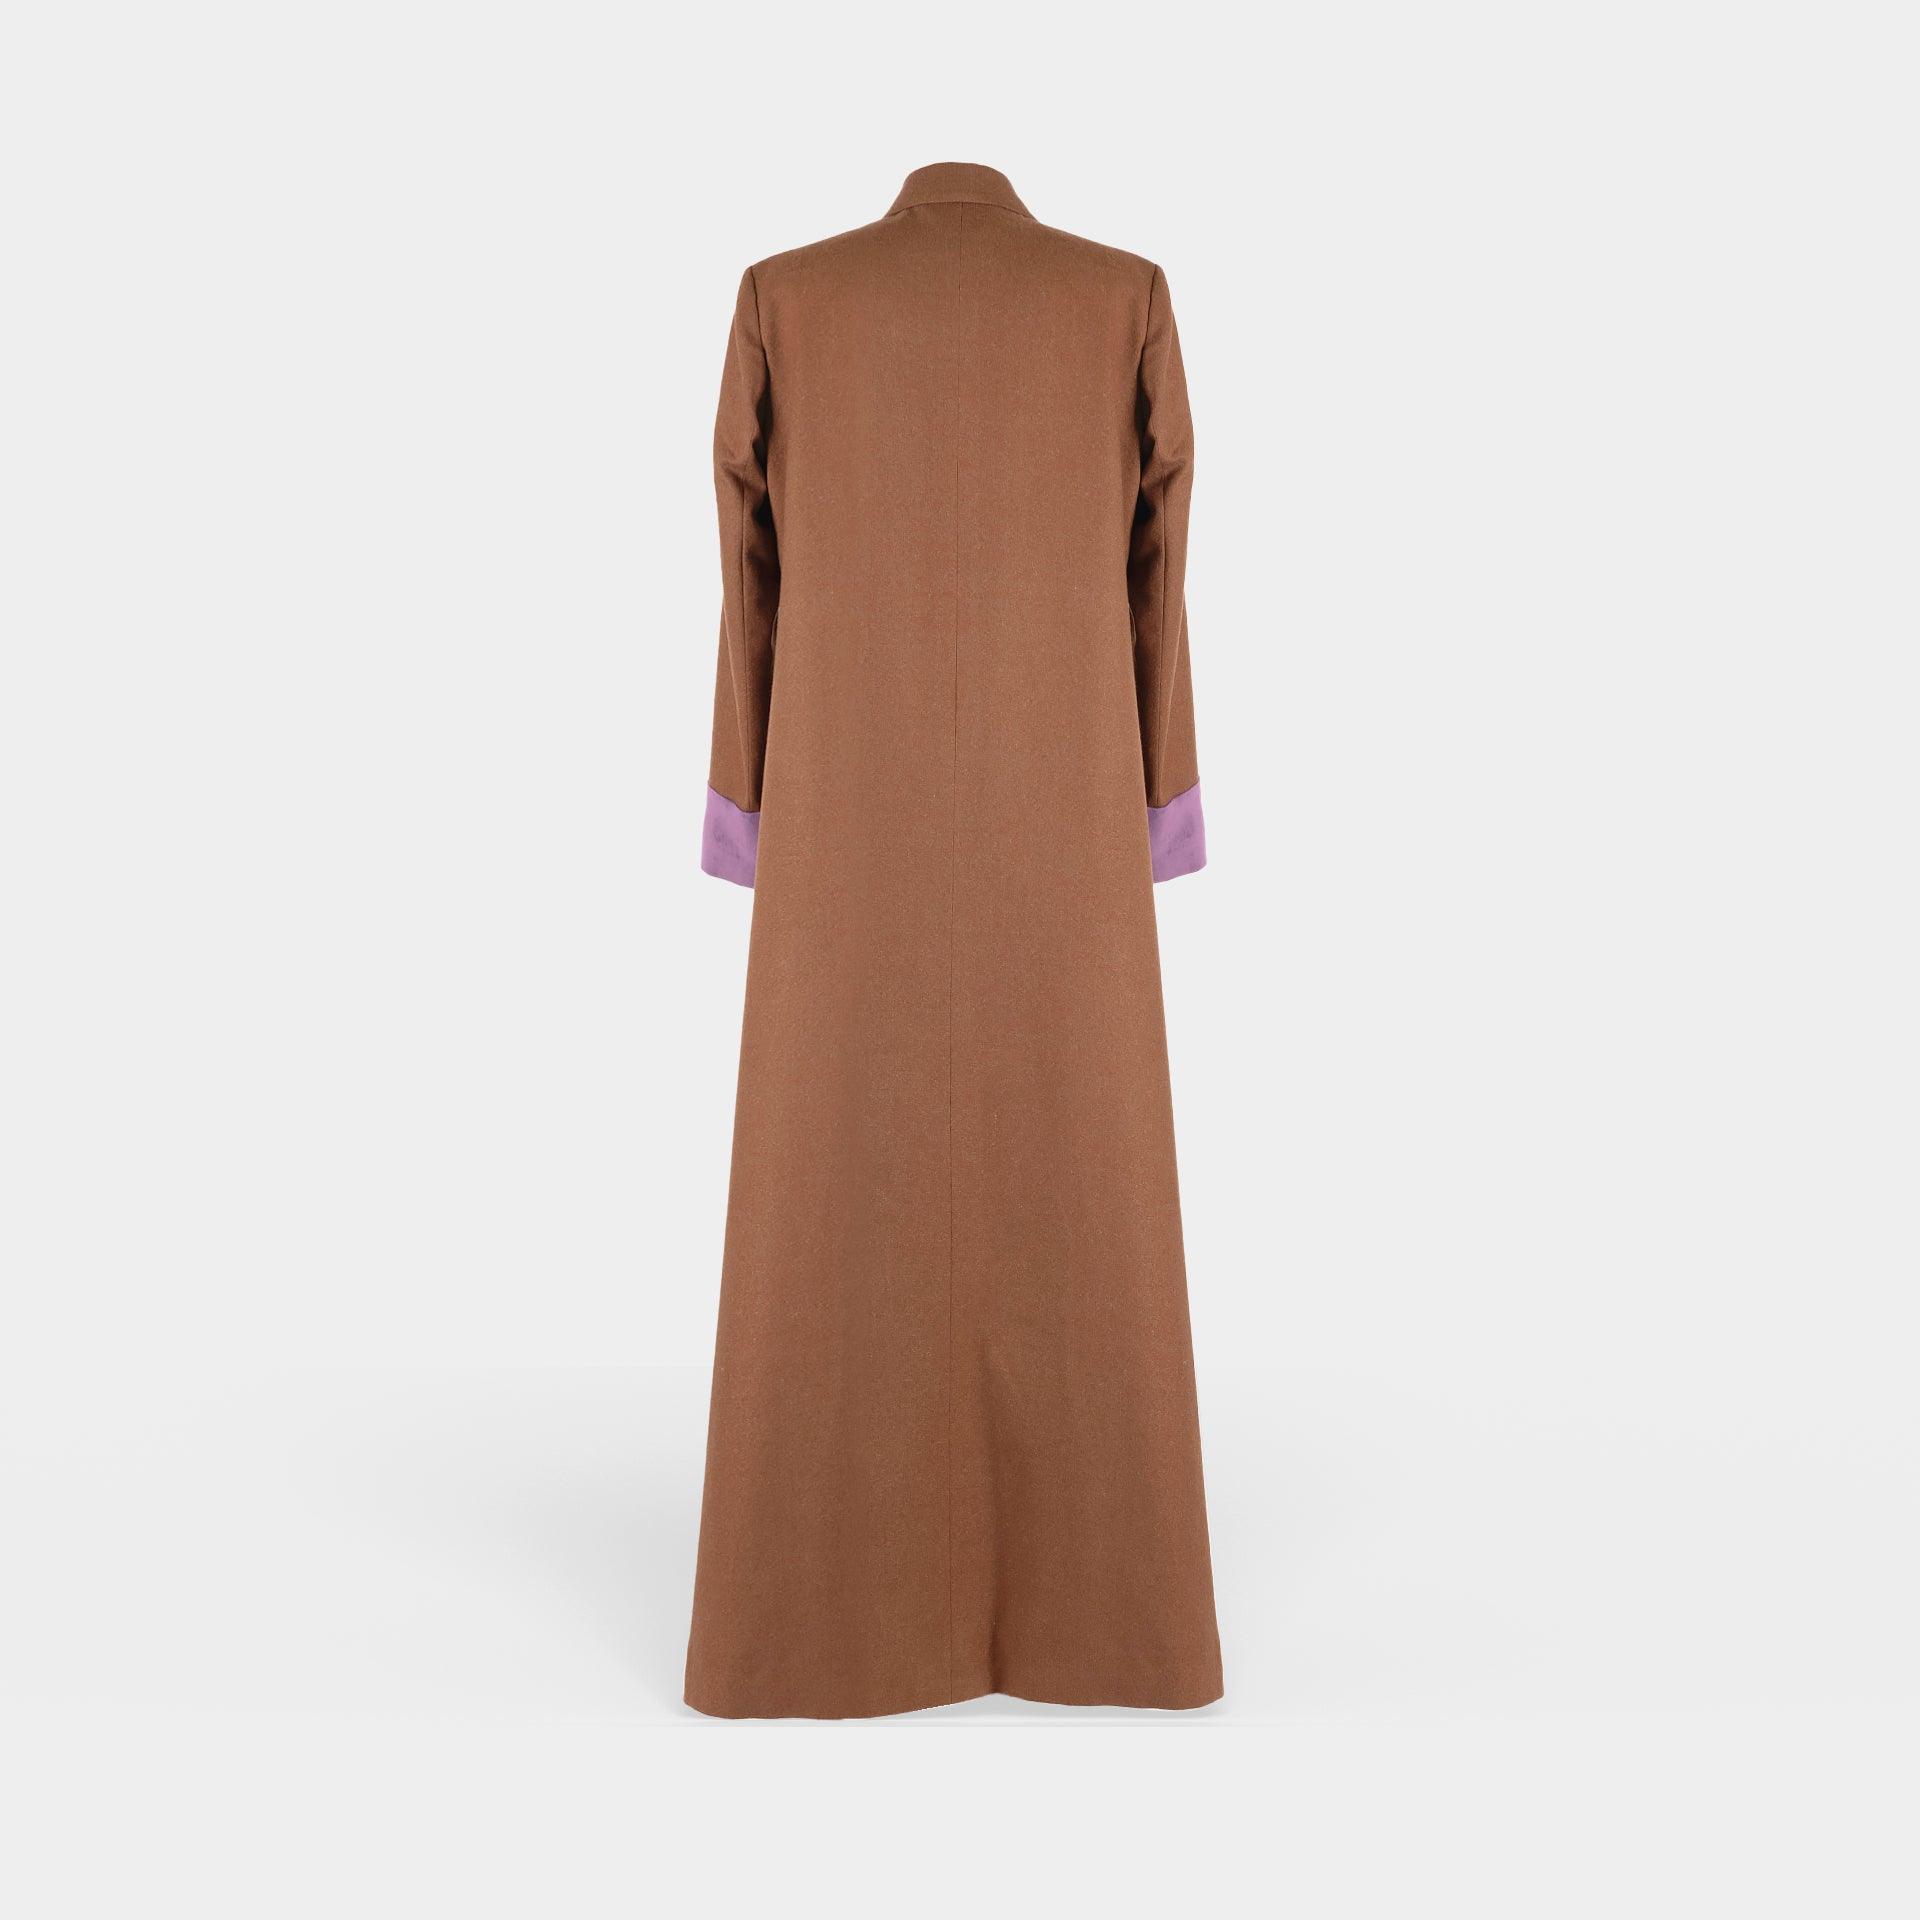 BROWN AND MAUVE SUIT ABAYA BY IVORI - WECRE8